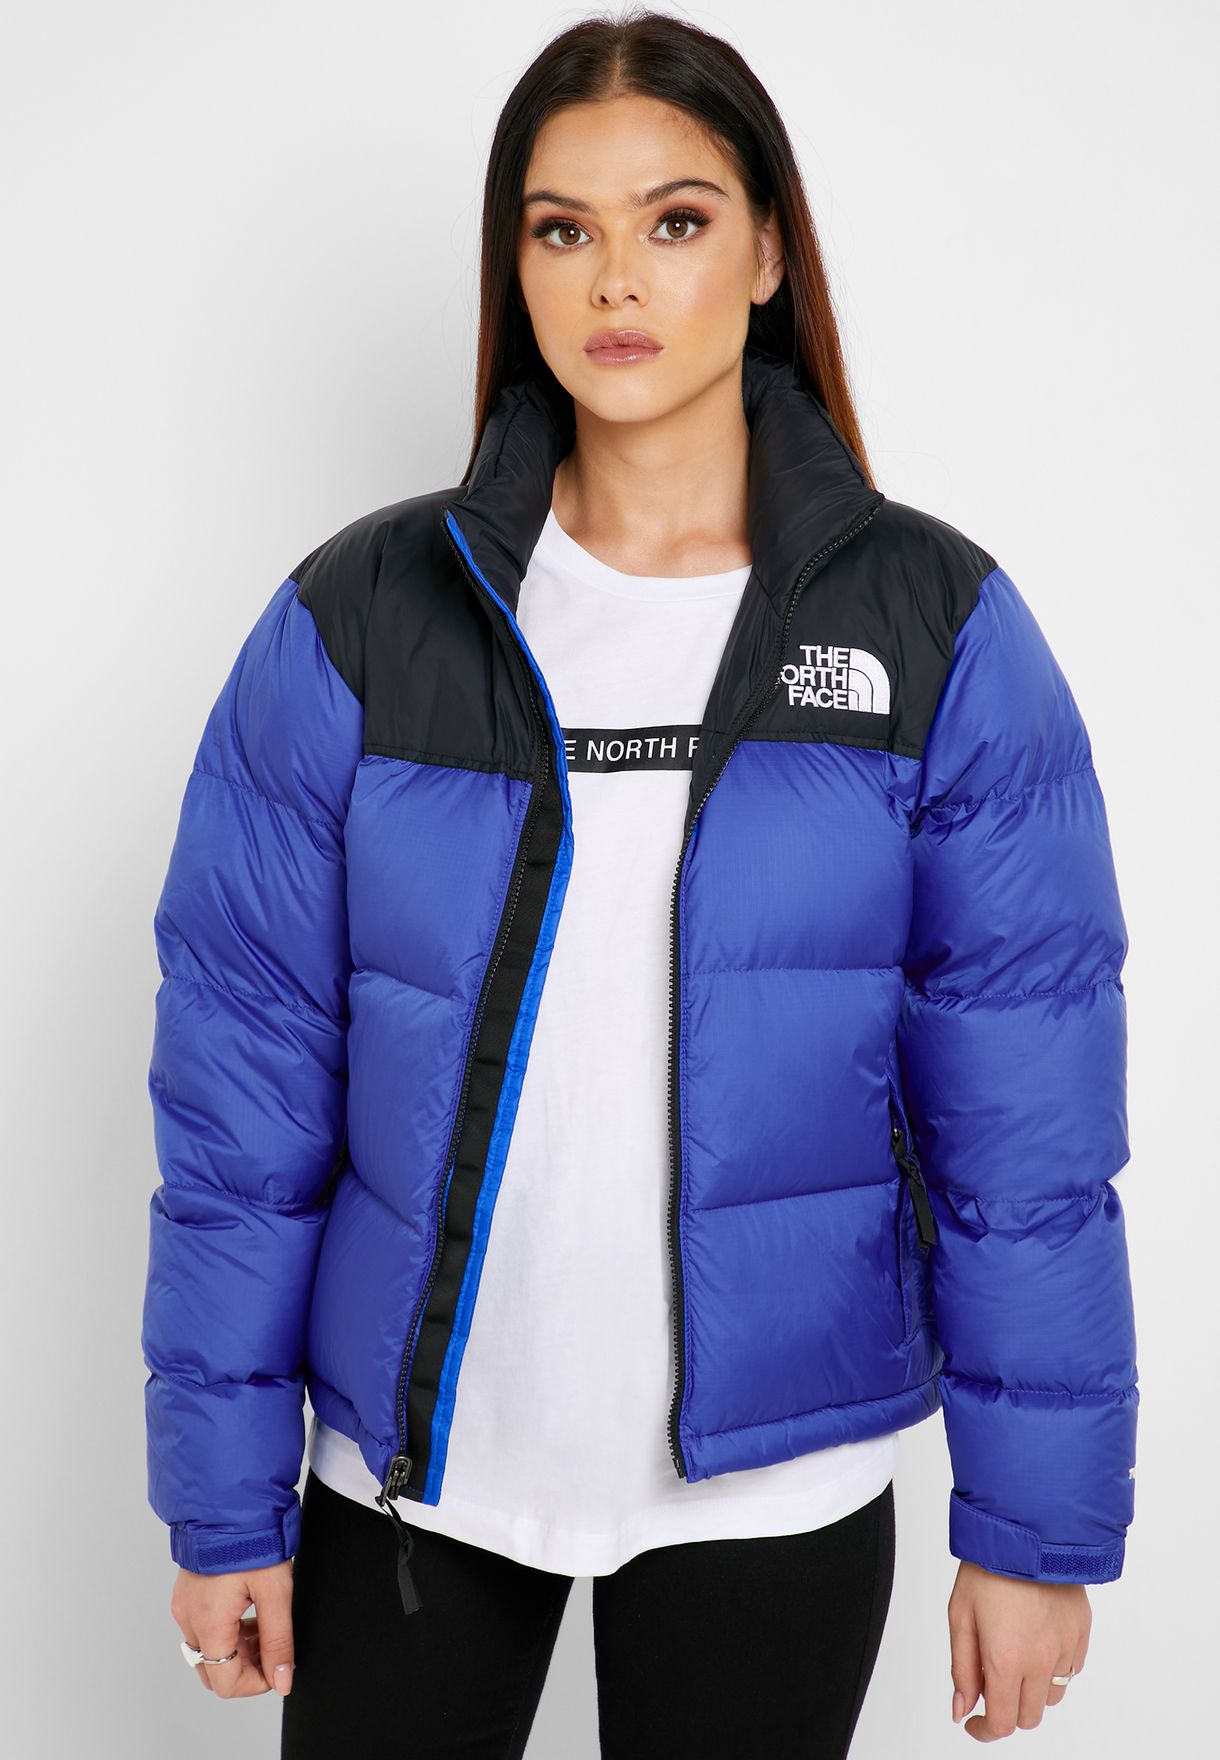 old style north face jackets